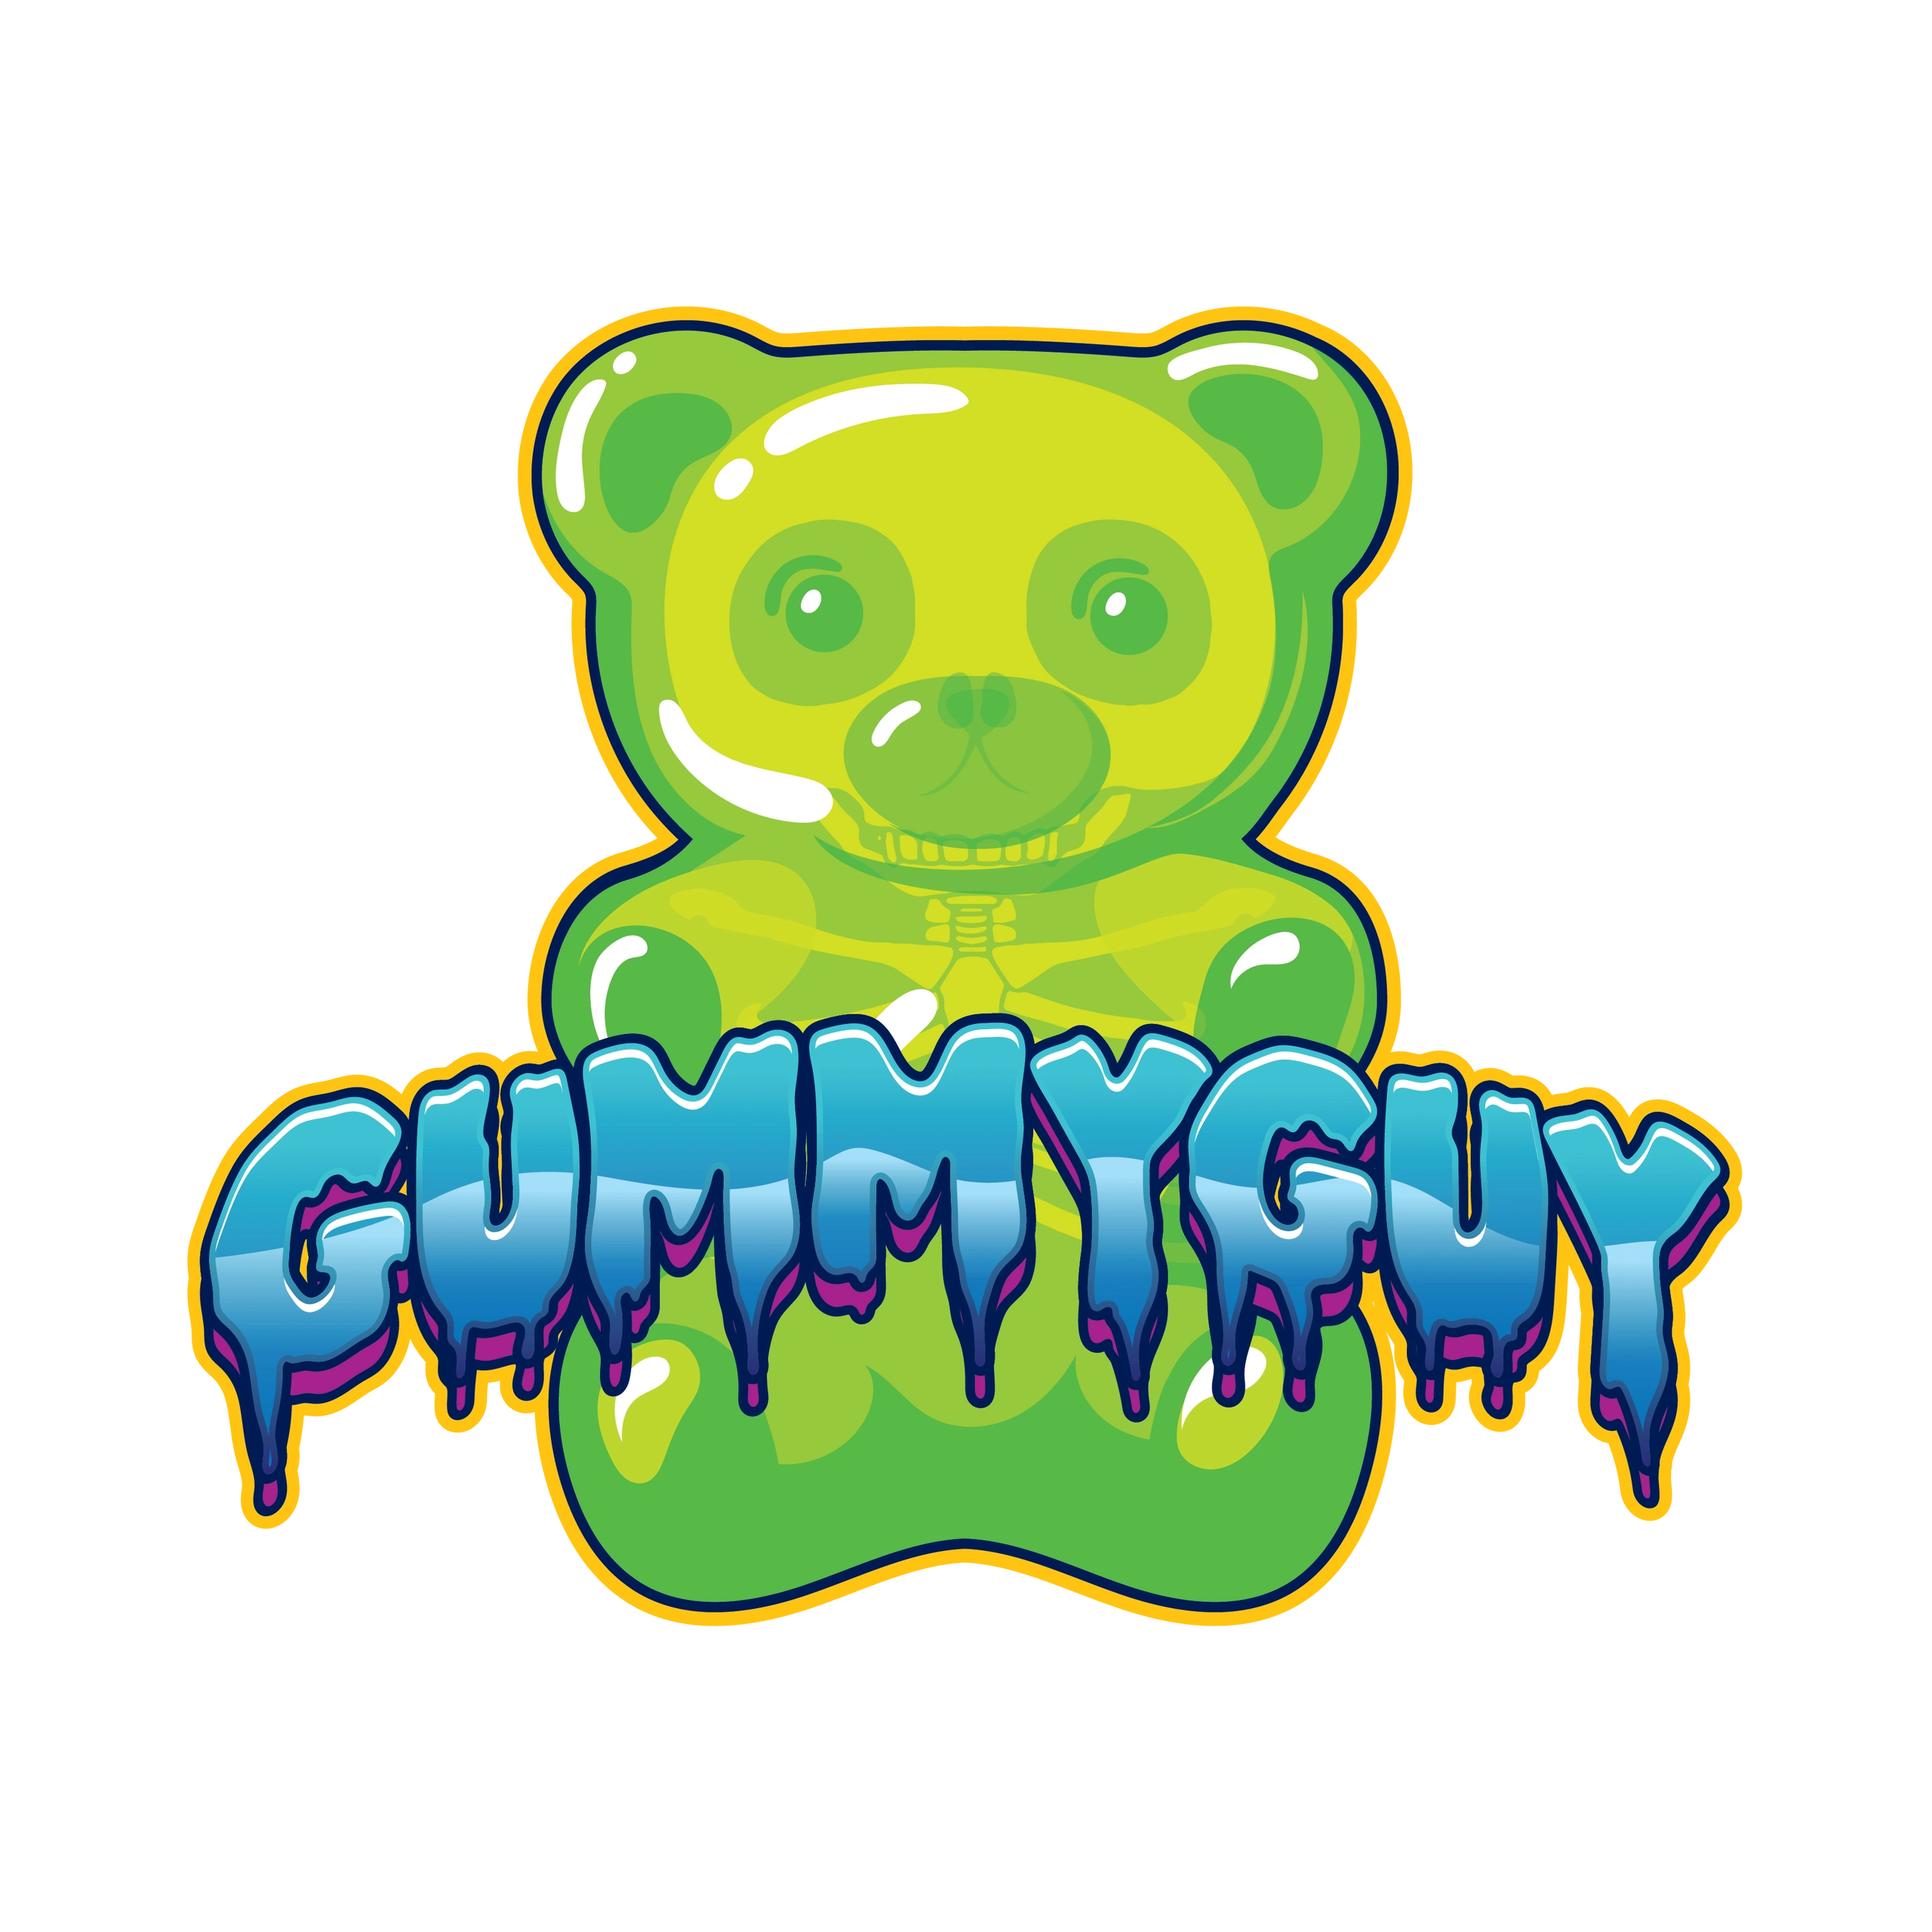 GummyGuy gummy bears logo with bold, colorful text and a neon green gummy bear with skeleton